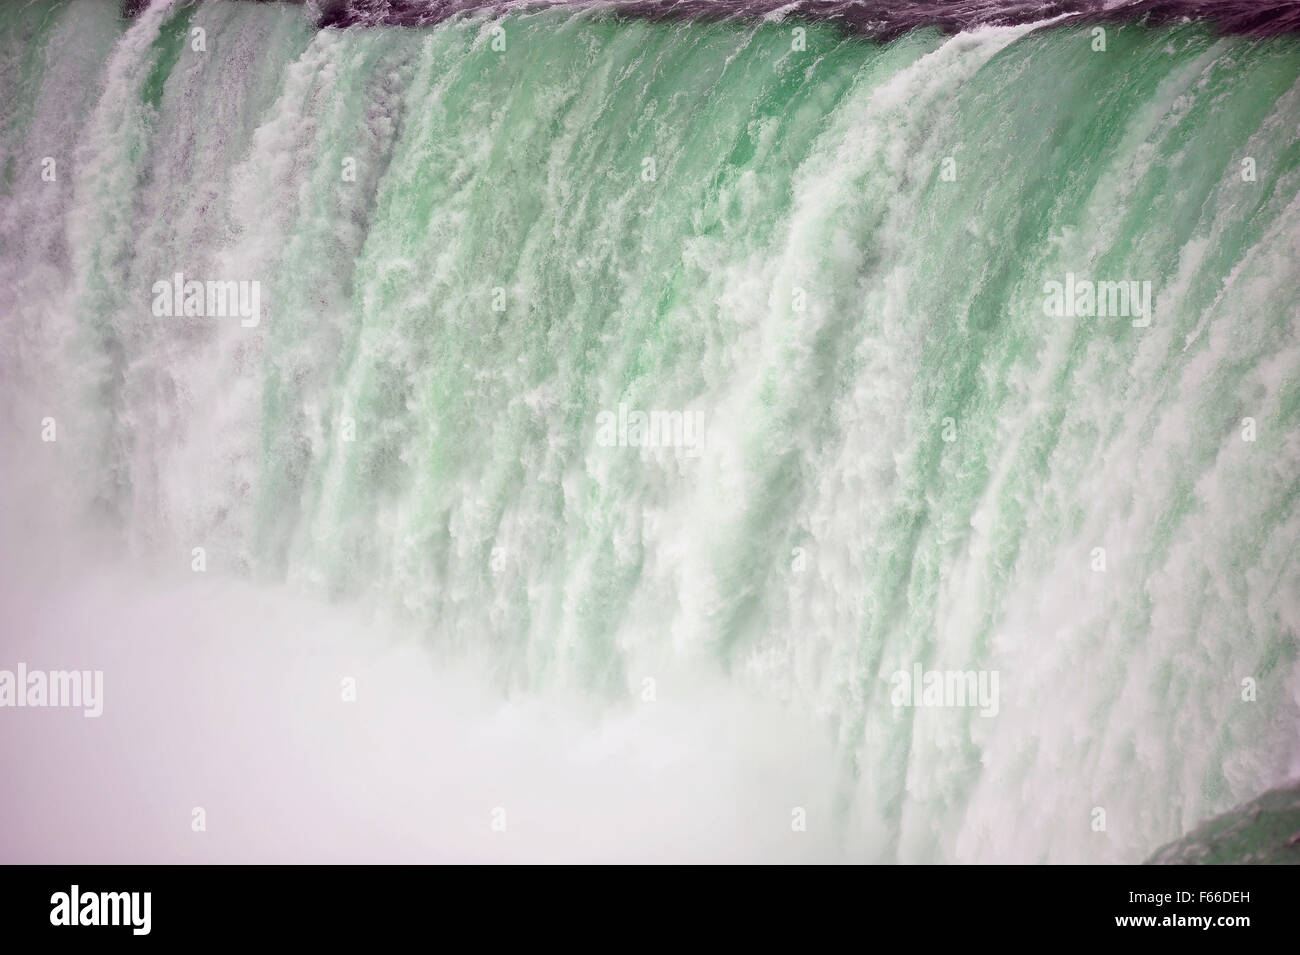 Water rushes over the top of the Horseshoe falls on the Canadian side of the Niagara Falls in Ontario. Stock Photo